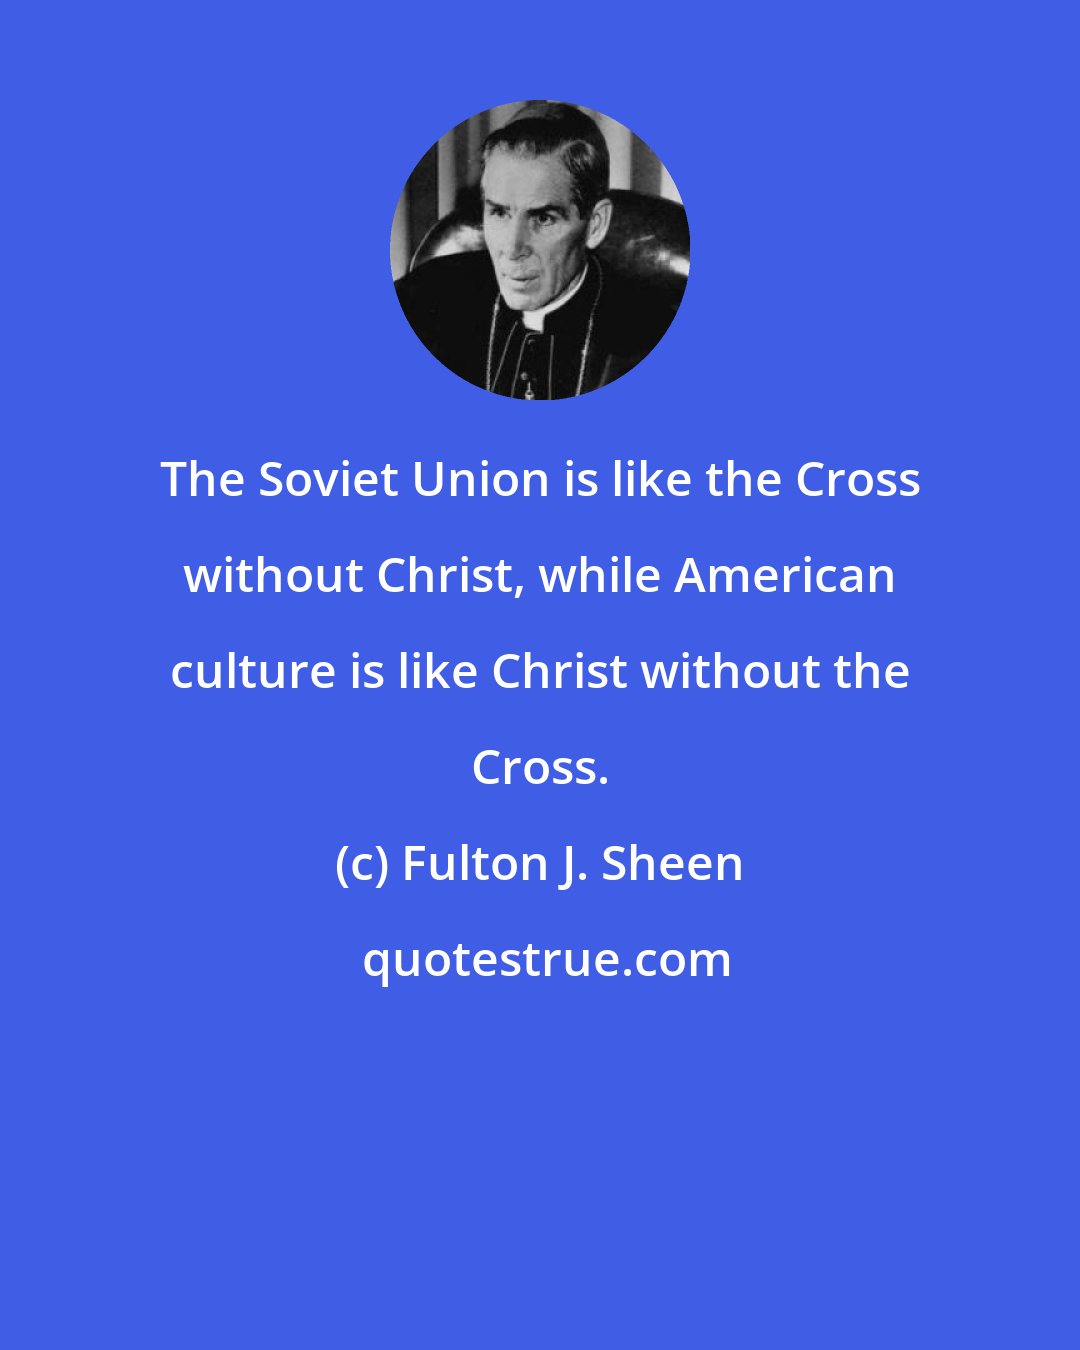 Fulton J. Sheen: The Soviet Union is like the Cross without Christ, while American culture is like Christ without the Cross.